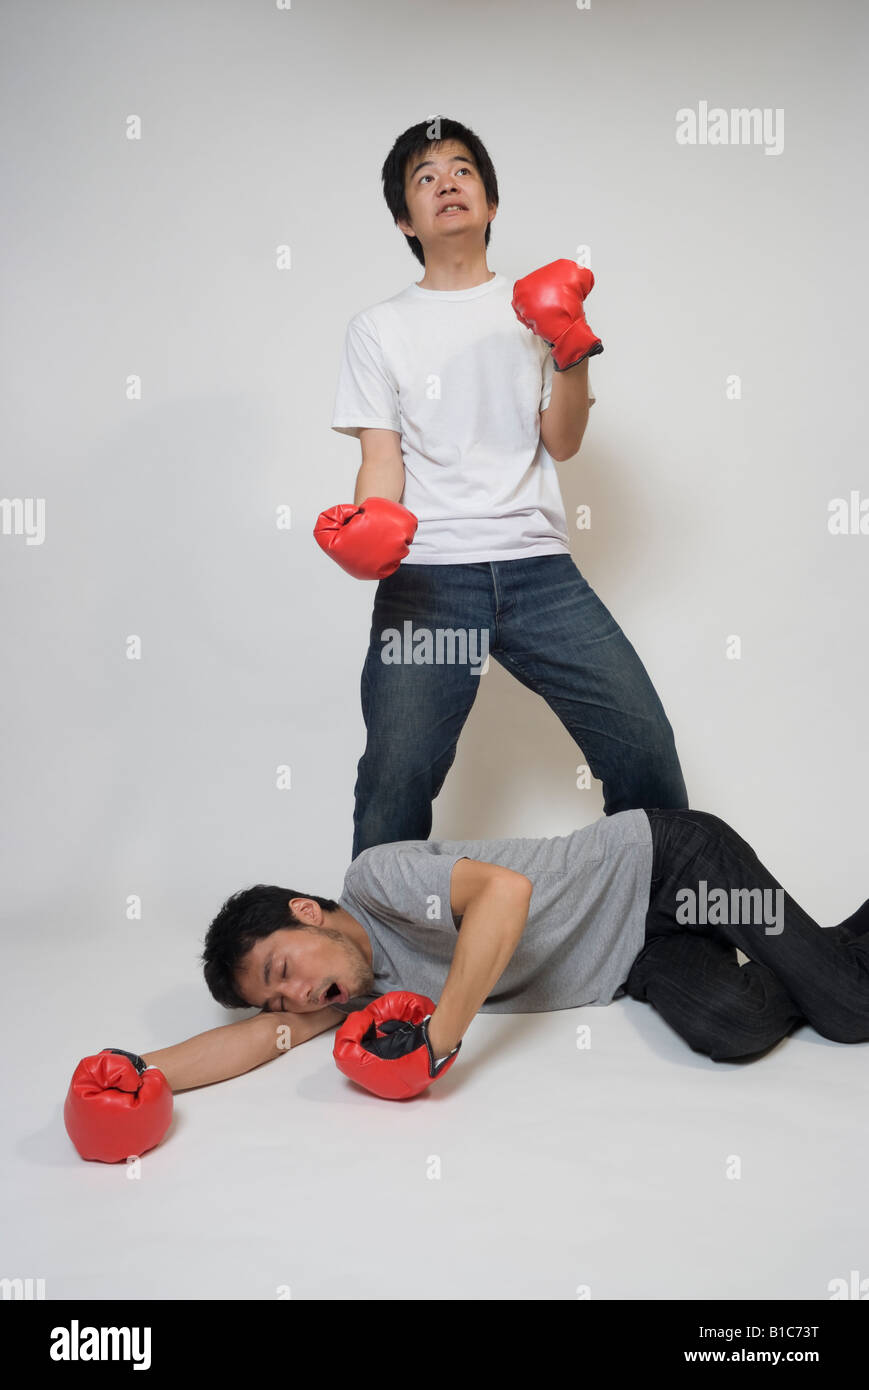 Two young men fighting Stock Photo